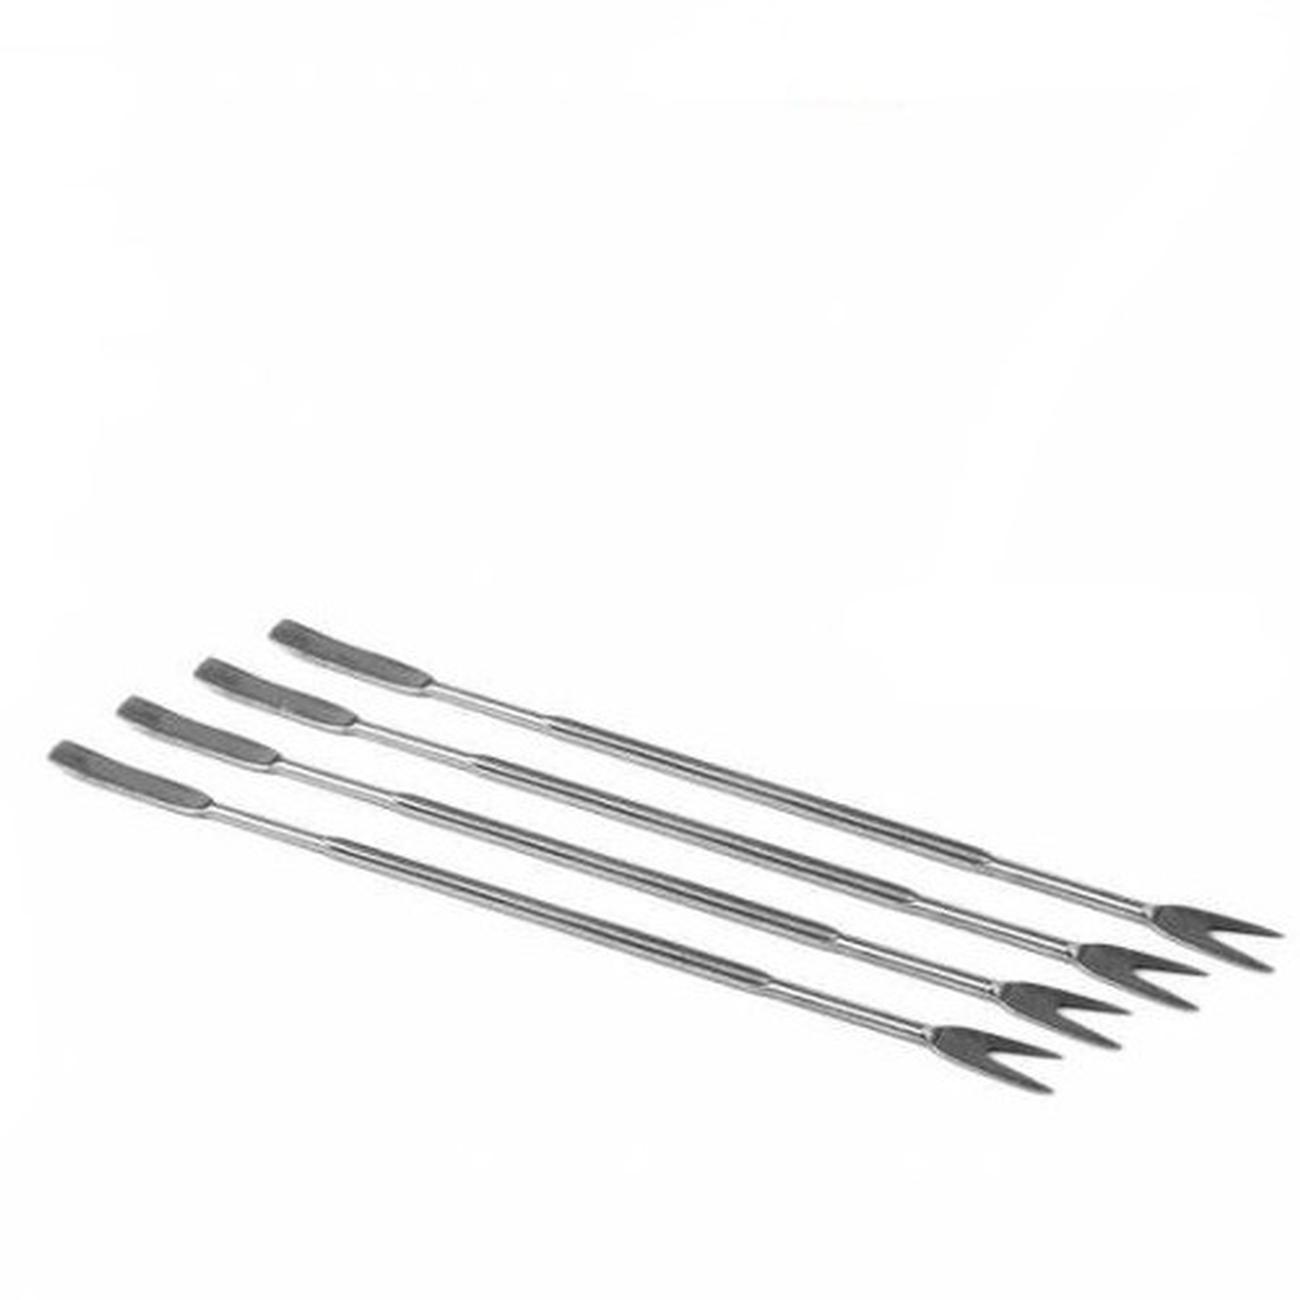 stainless-steel-seafood-forks-set-of-4 - Stainless Steel Seafood Forks 4pc Set